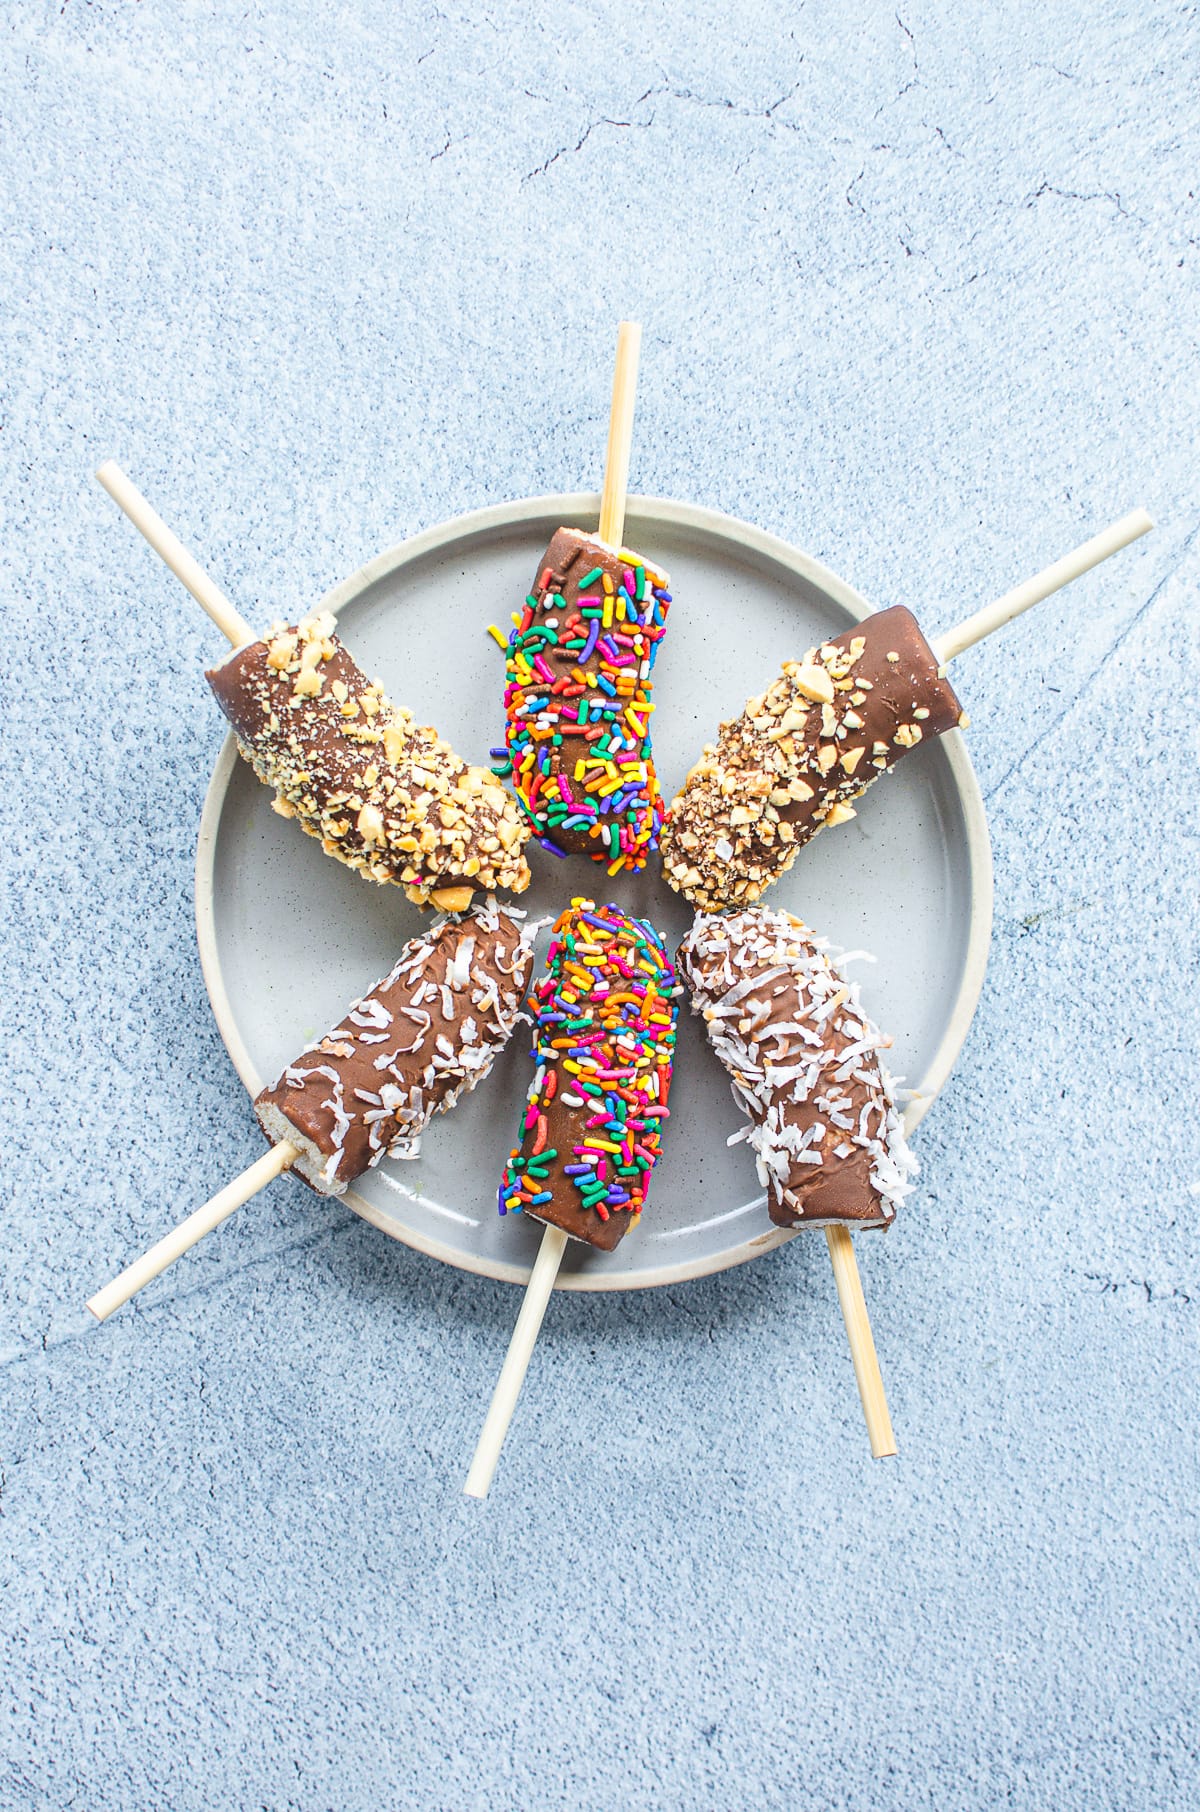 A blue plate with six chocolate-dipped frozen banana pops covered in an assortment of nuts, sprinkles, and coconut.